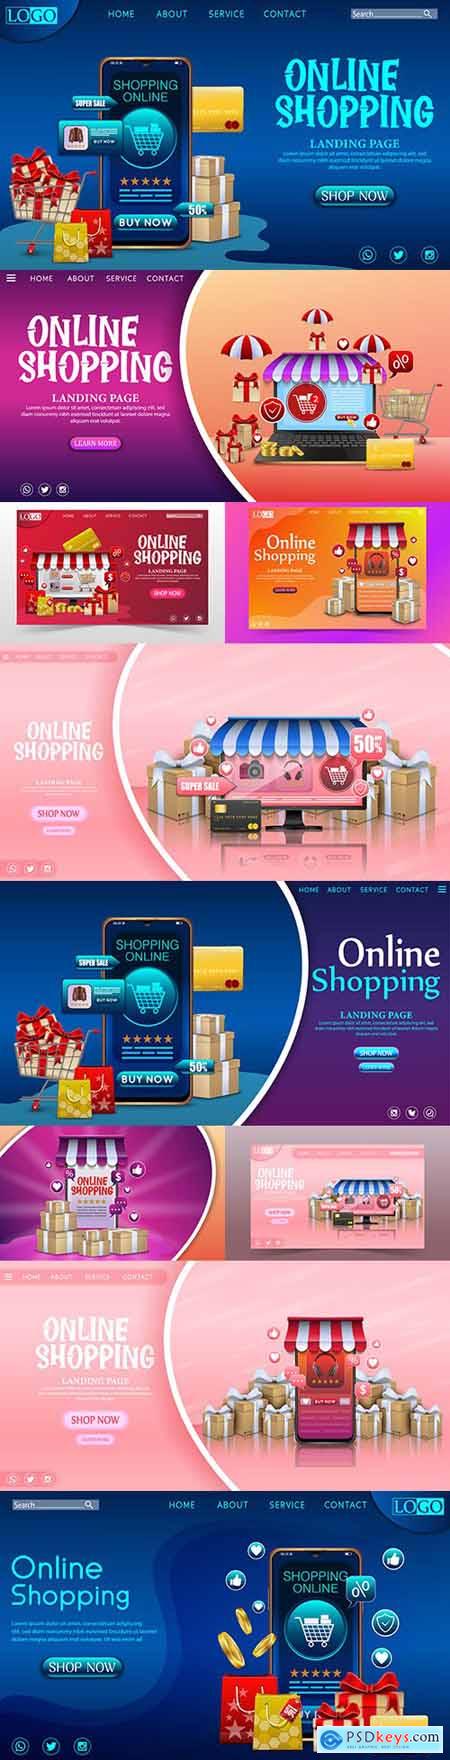 Online store on mobile app with gifts design concept